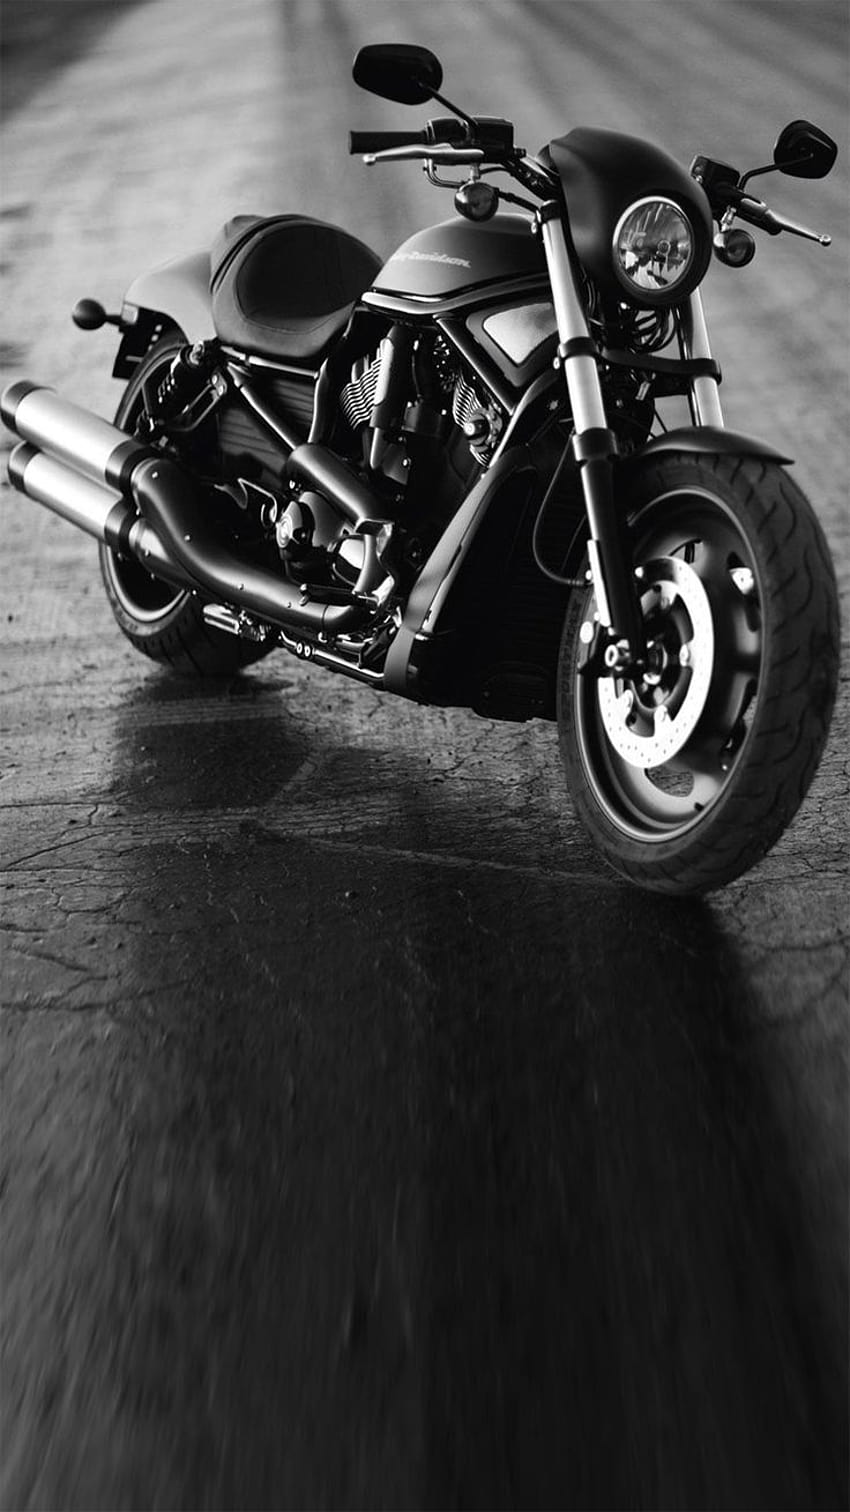 Motorcycle iPhone on Dog, motorbike for iphone HD phone wallpaper